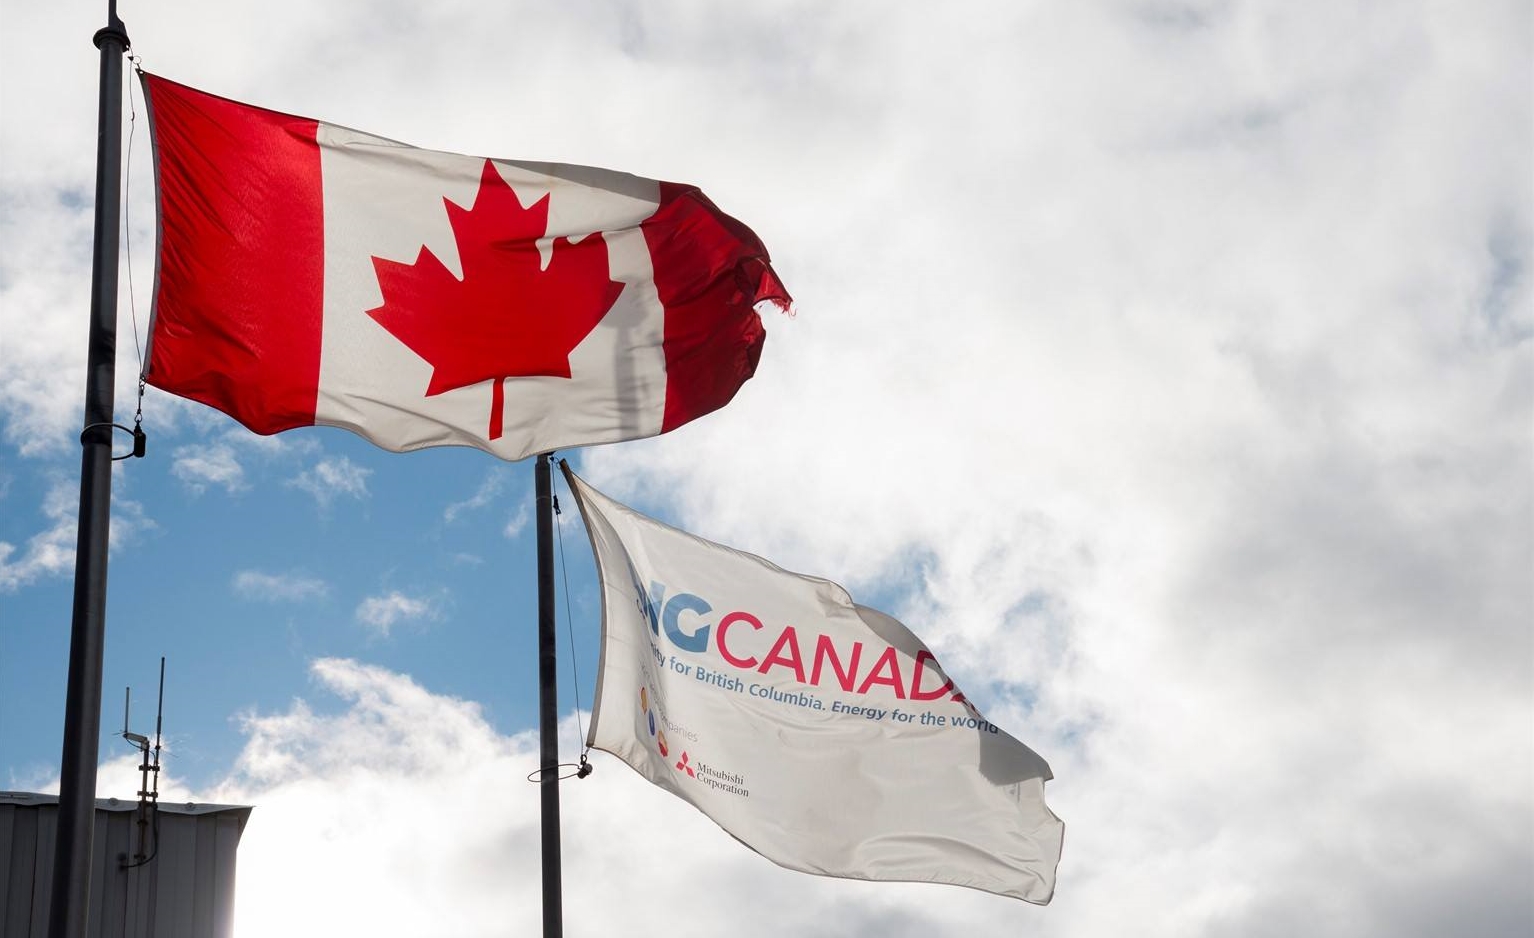 LNG Canada unaffected by pipeline, trade issues